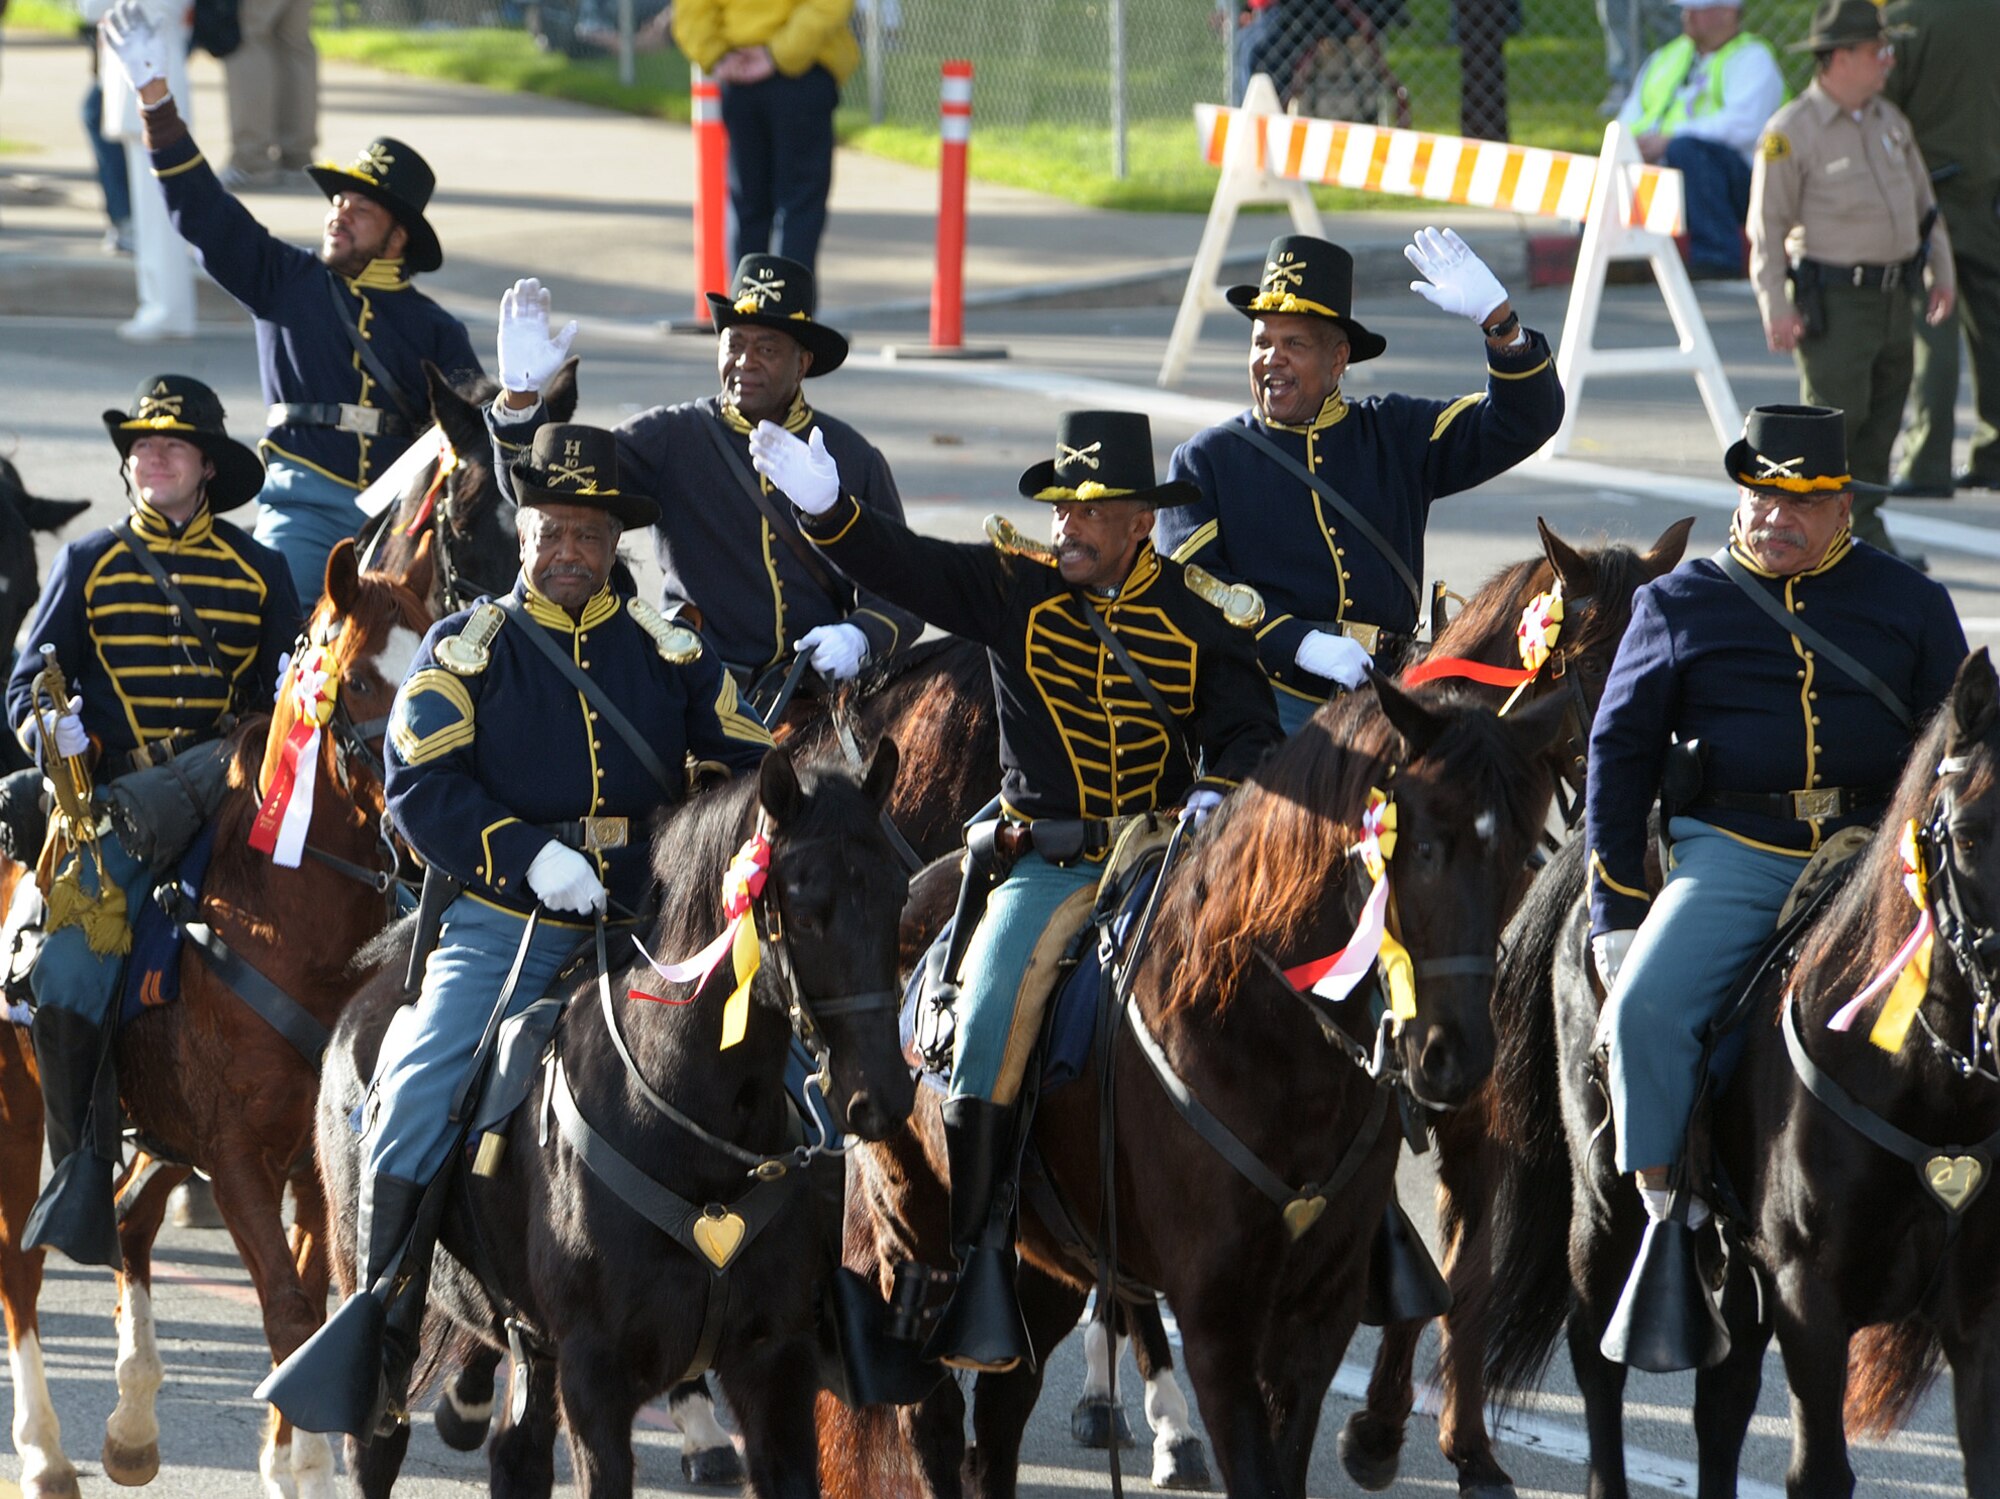 The New Buffalo Soldiers, a historical reenactment group, rode horses down the parade route during the 2010 Pasadena Rose Parade, Jan 1. (Photo by Atiba S. Copeland)